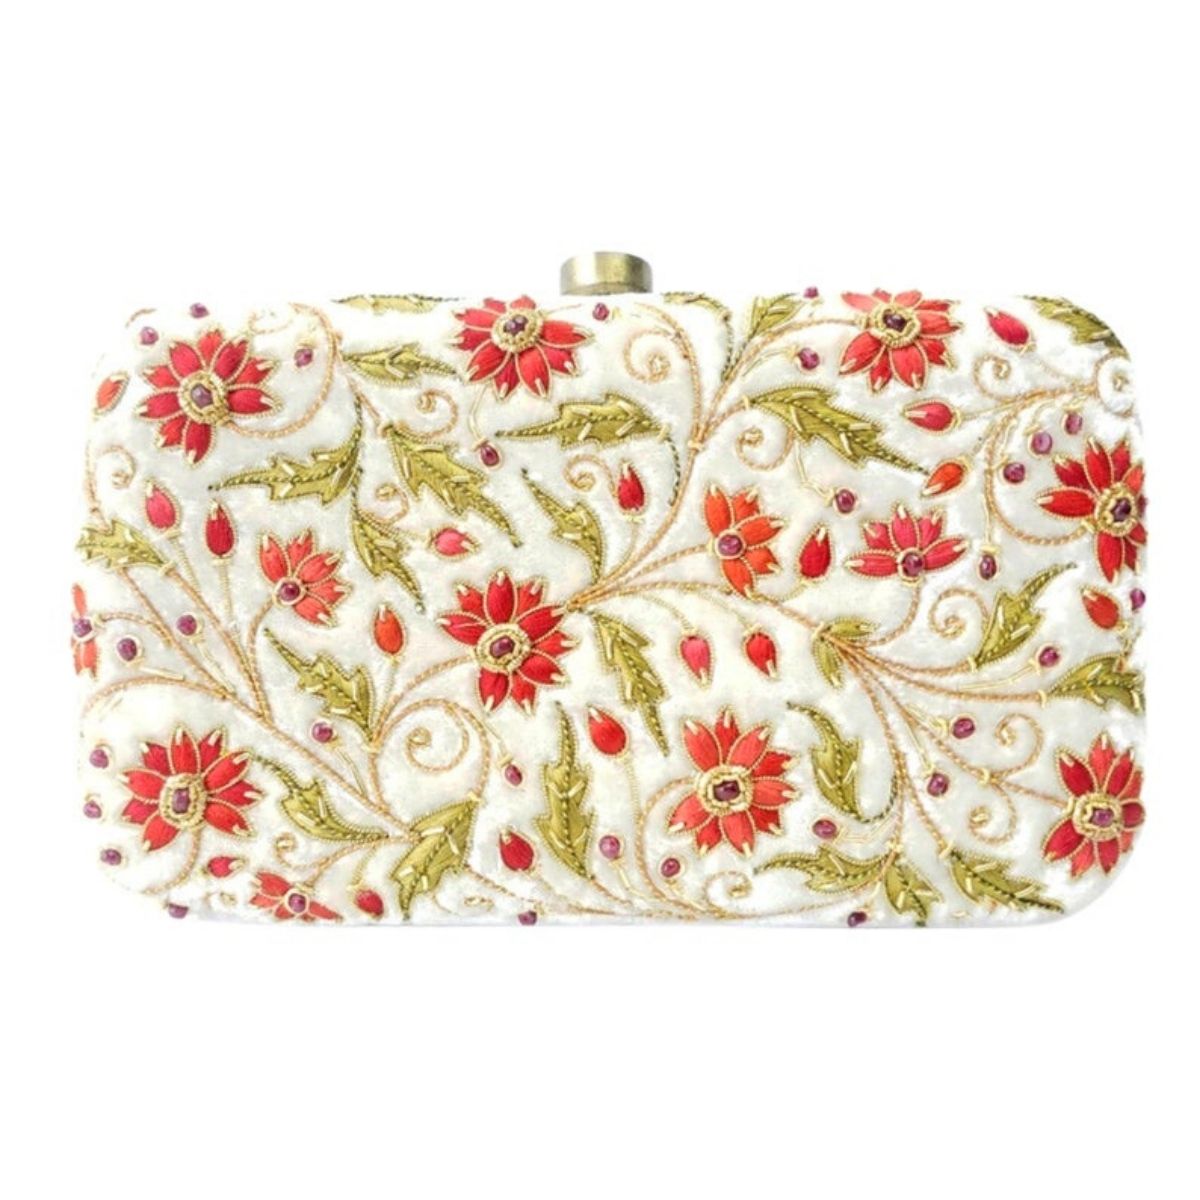 Bridal clutch bag on ivory velvet embroidered with red flowers and embellished with genuine ruby gemstones, zardozi purse. 